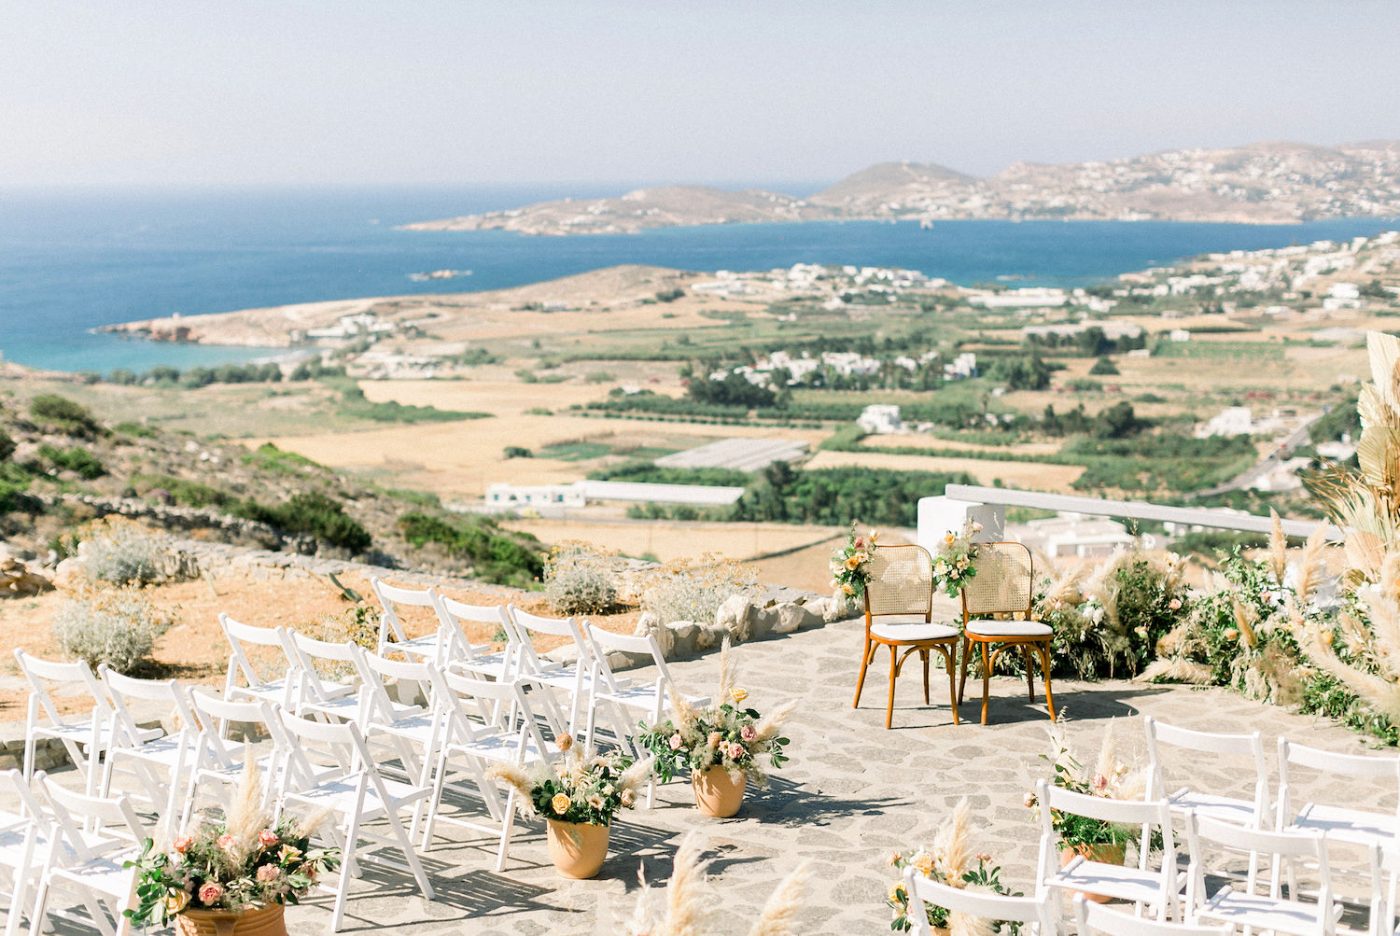 How to Plan a Destination Wedding in the Cyclades? A 10-Step Guide